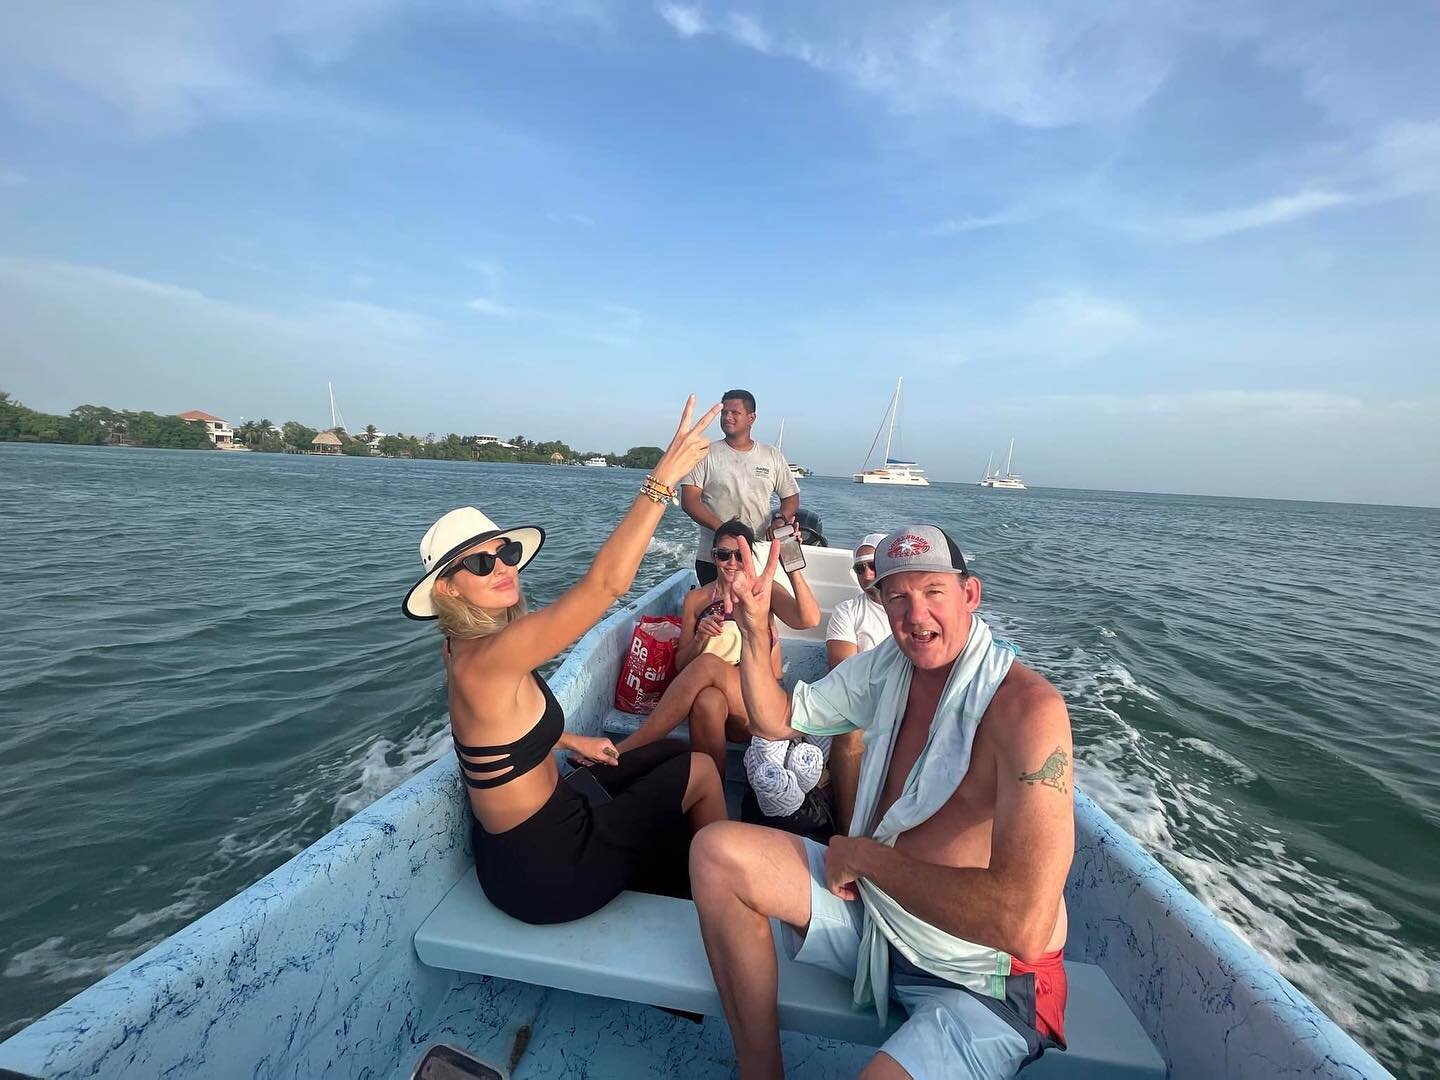 Cheers to paradise. 

#boatlife #placencia #belize #waves #familytime